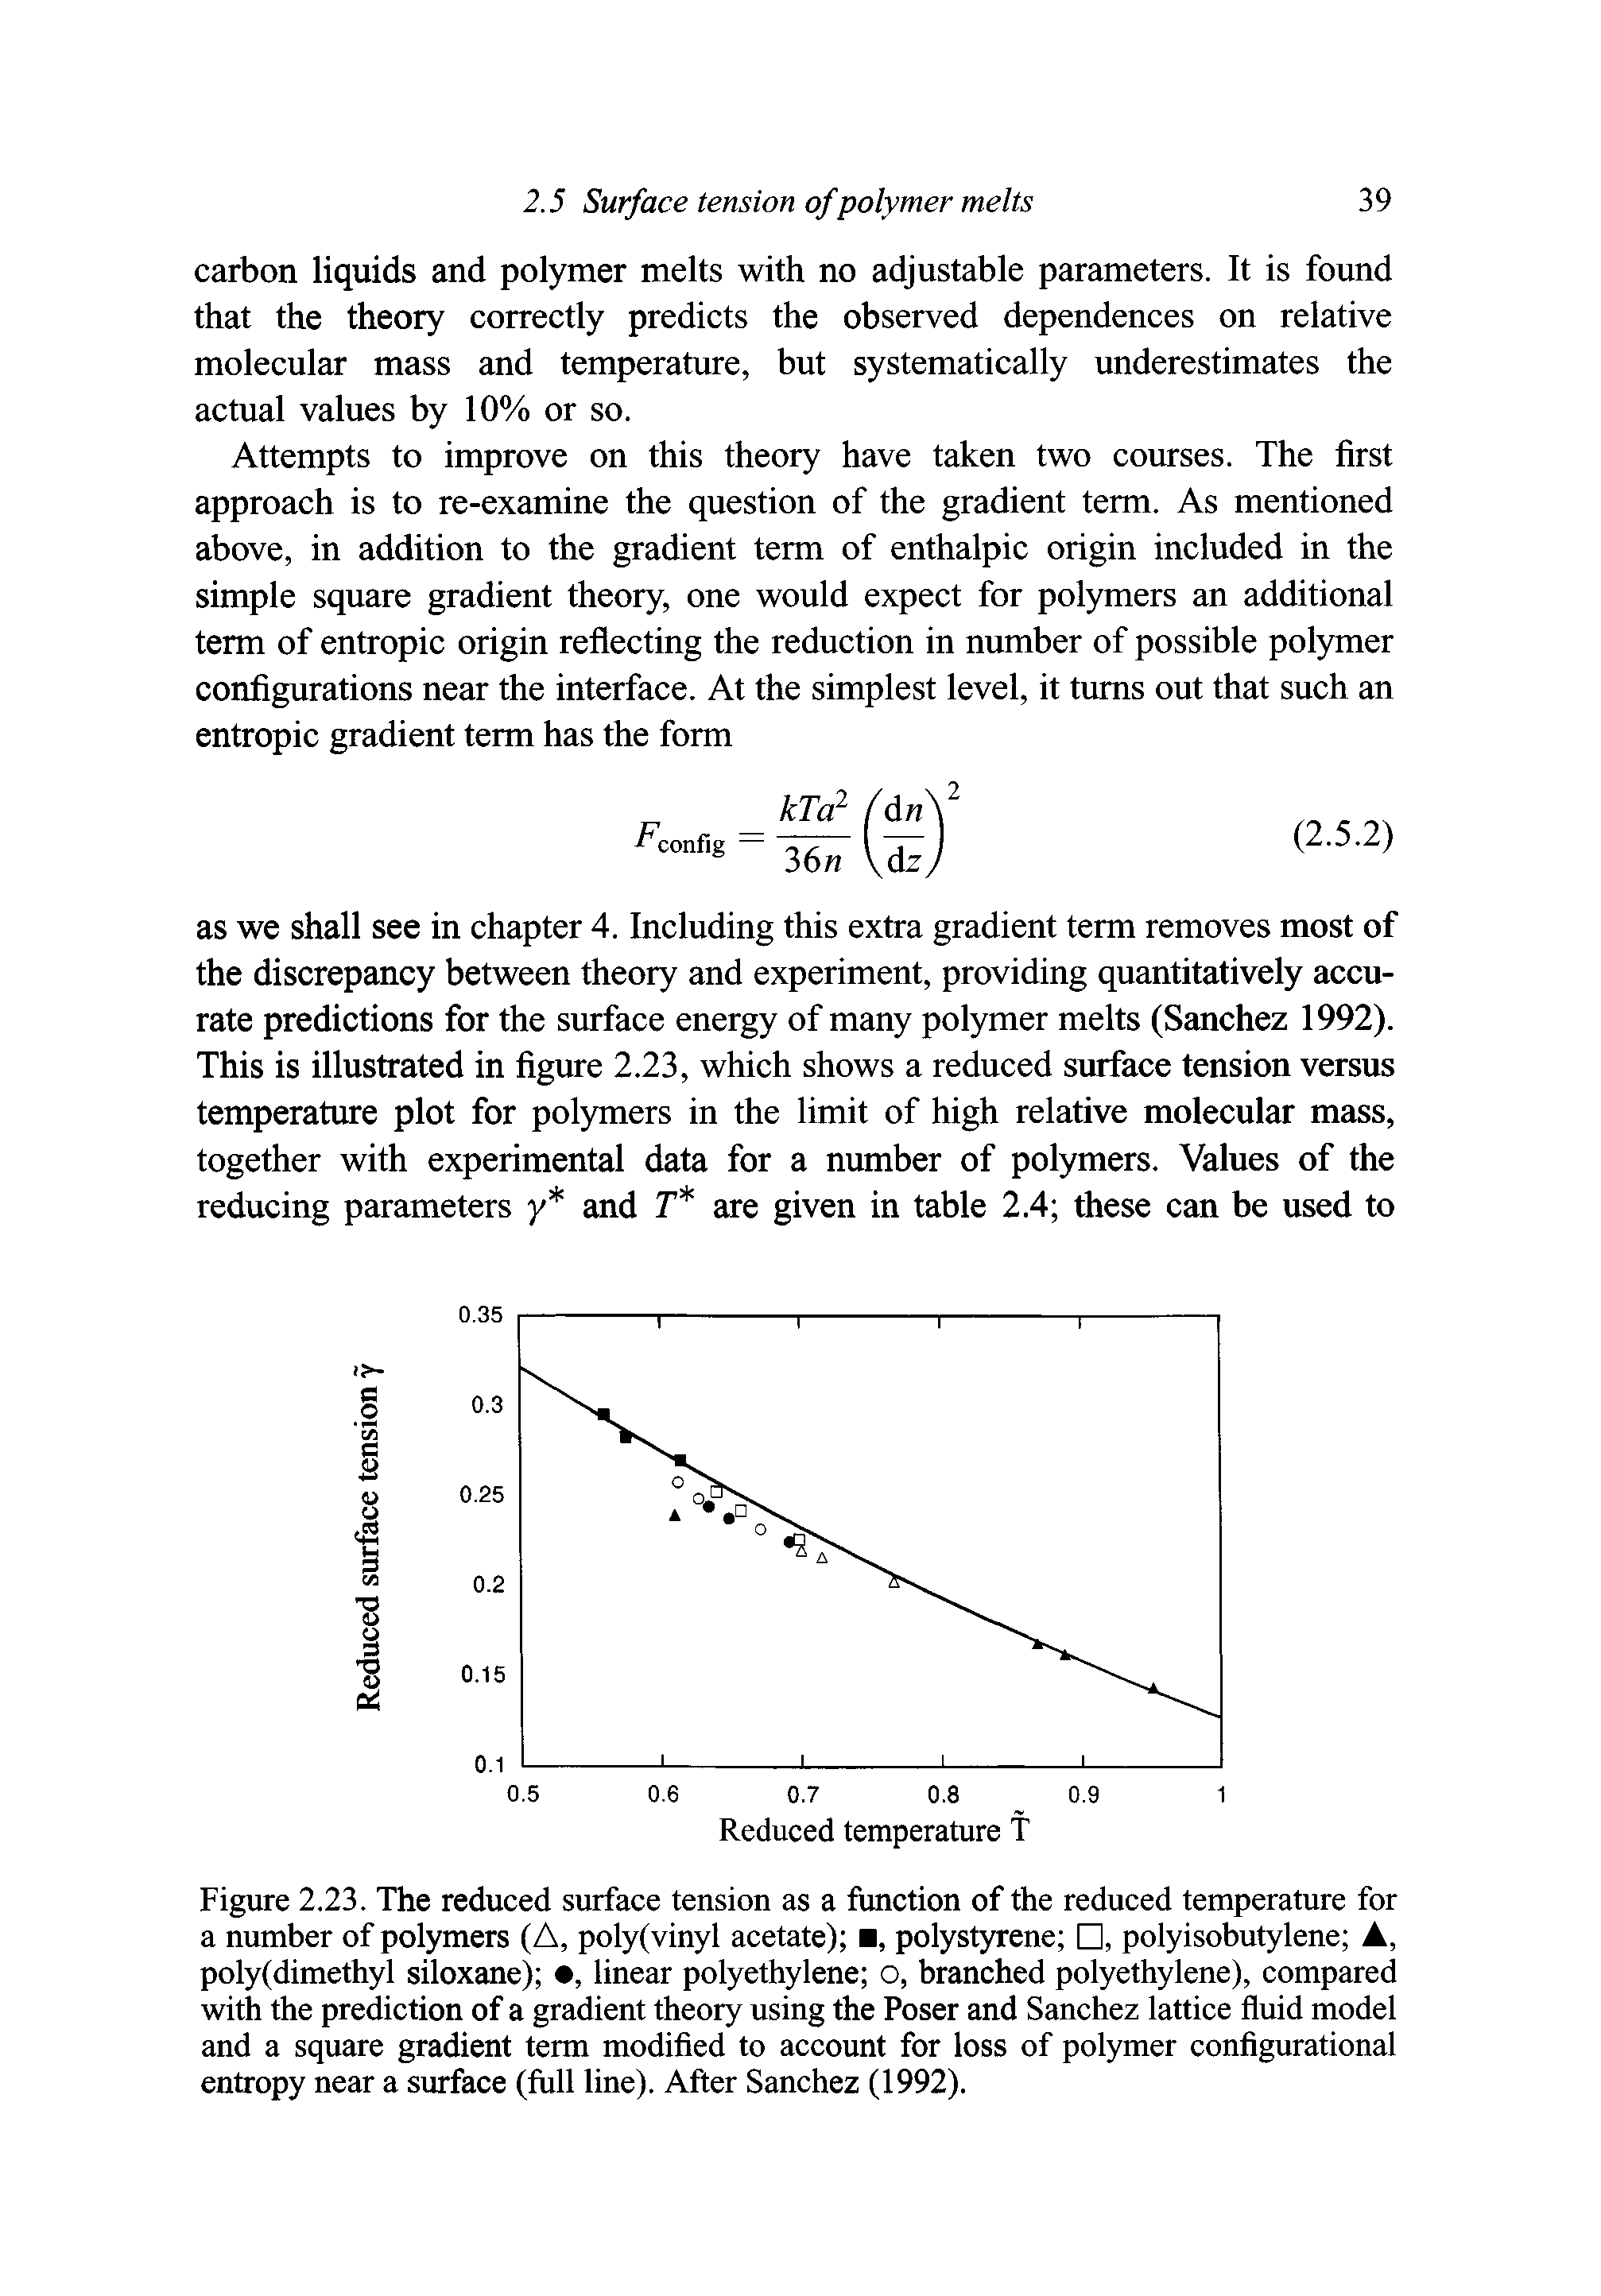 Figure 2.23. The reduced surface tension as a function of the reduced temperature for a number of polymers (A, poly(vinyl acetate) , polystyrene , polyisobutylene A, poly(dimethyl siloxane) , linear polyethylene o, branched polyethylene), compared with the prediction of a gradient theory using the Poser and Sanchez lattice fluid model and a square gradient term modified to account for loss of polymer configurational entropy near a surface (full line). After Sanchez (1992).